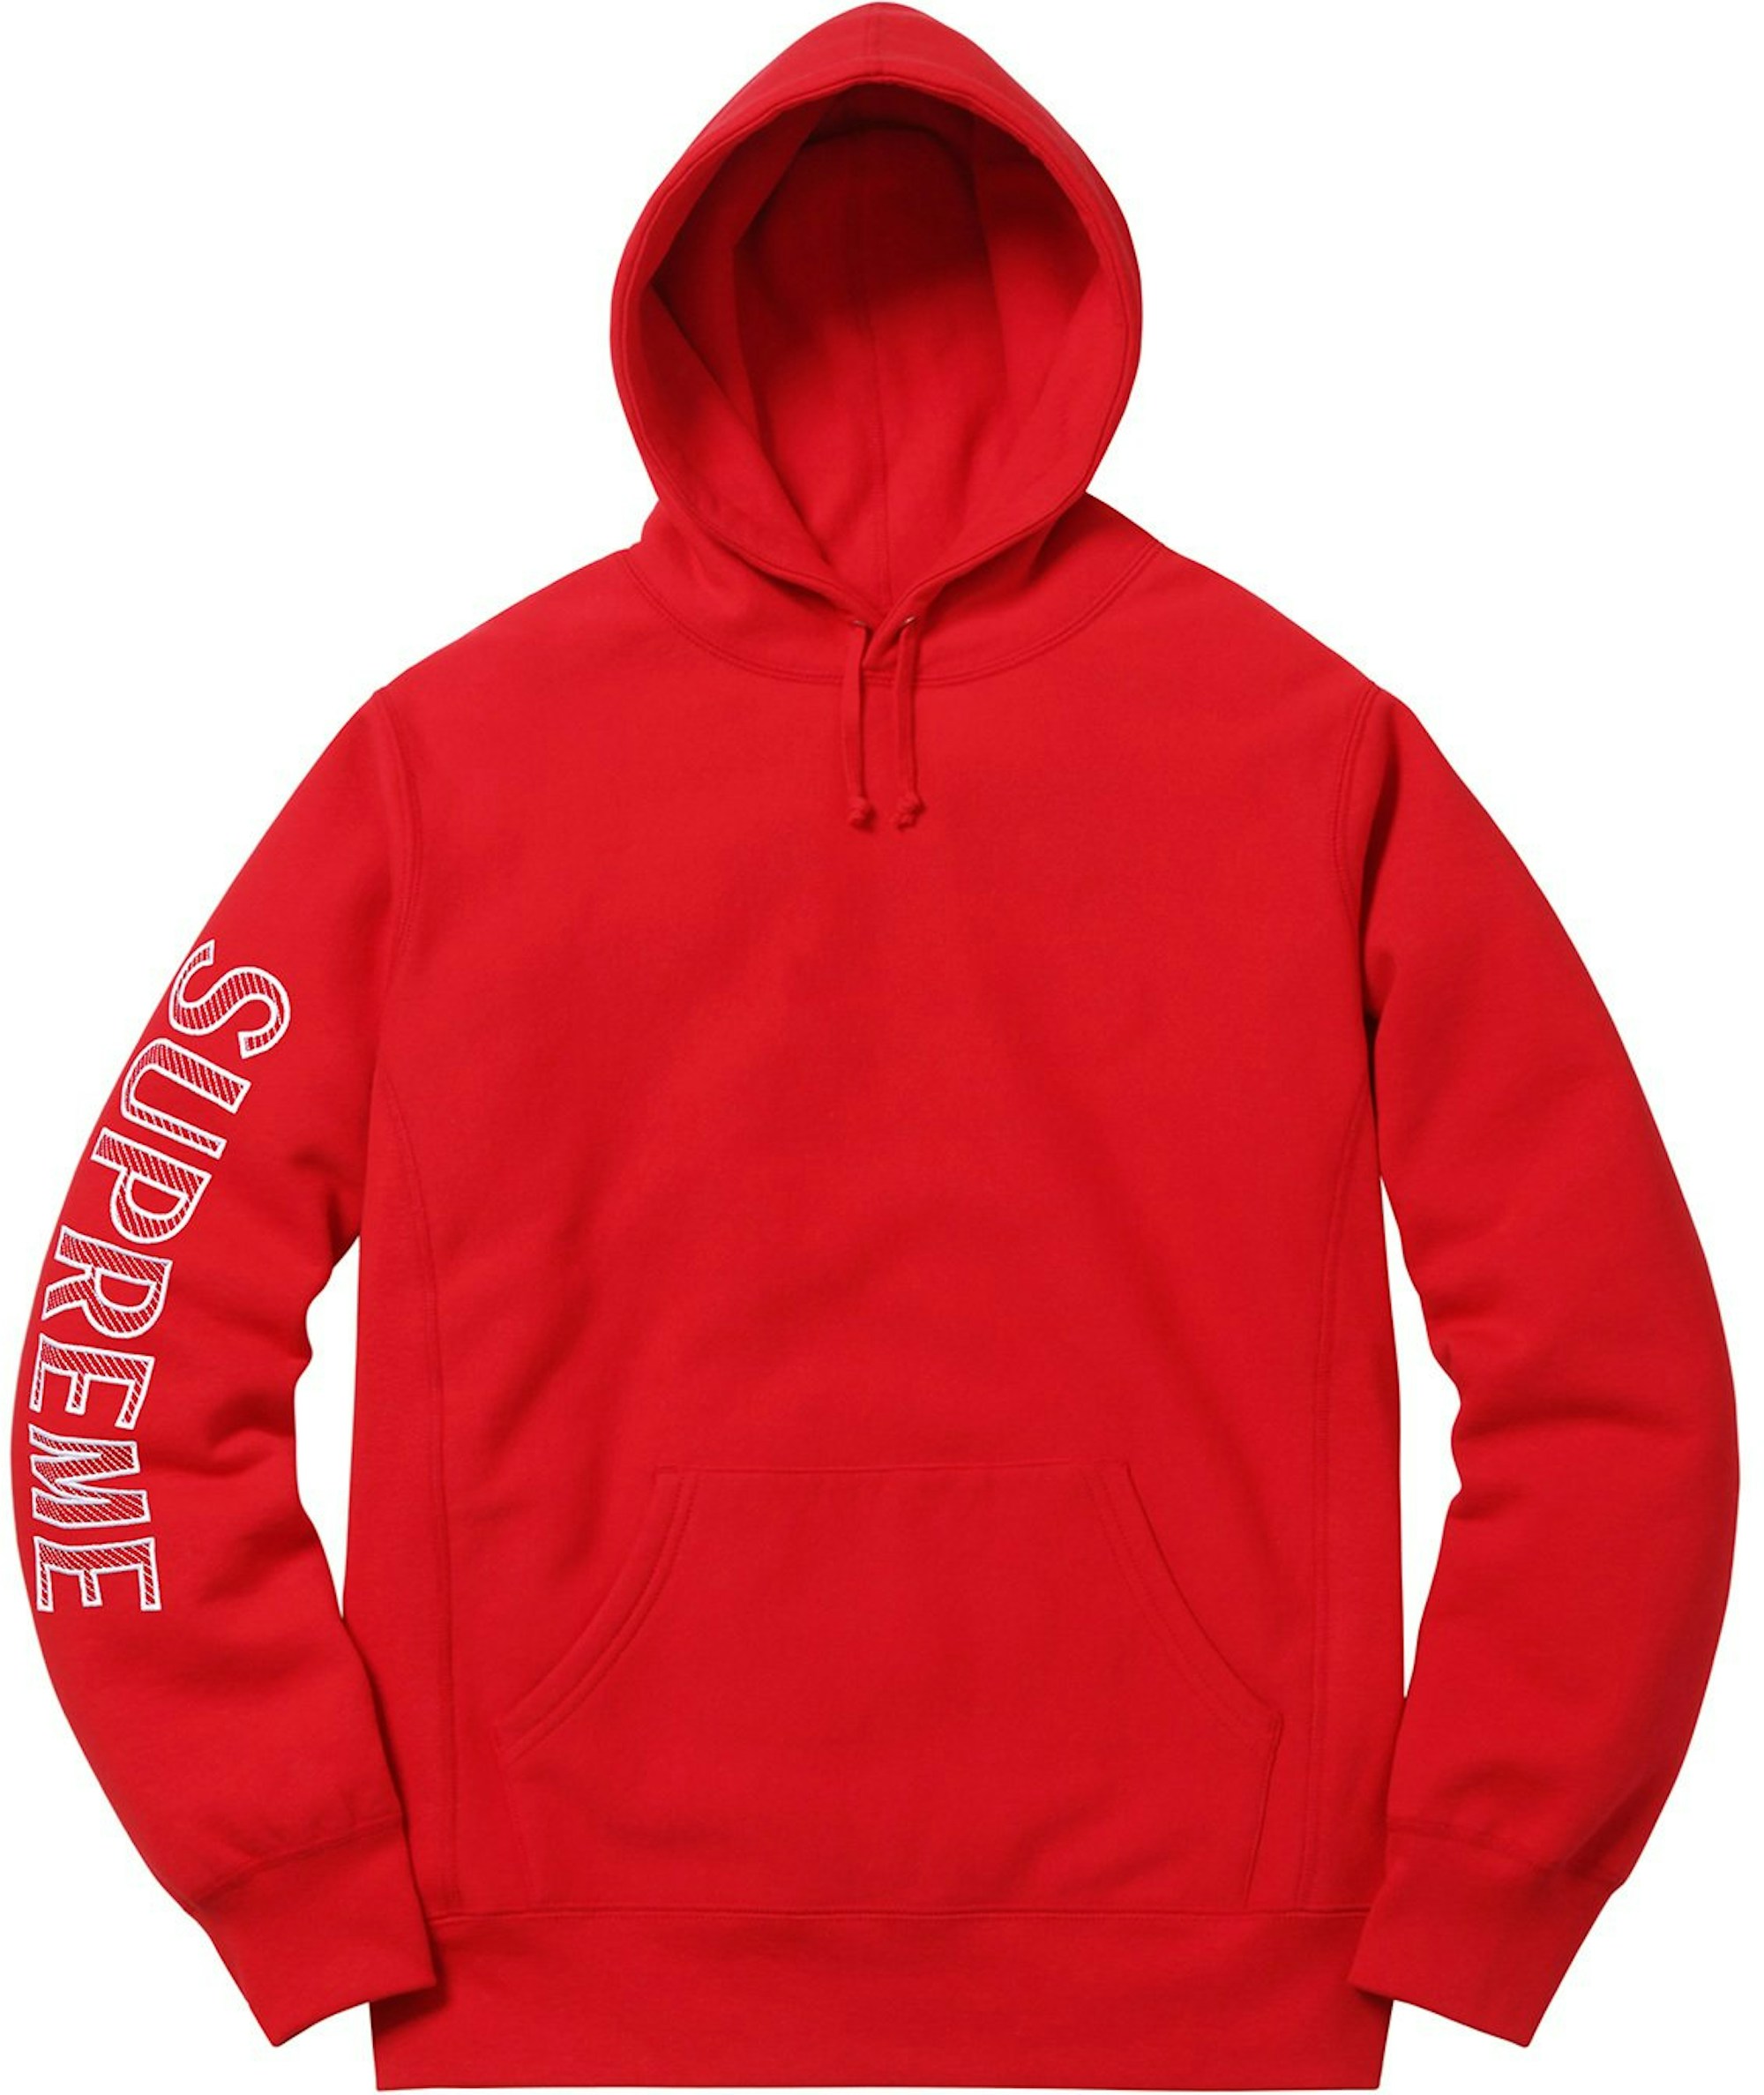 Supreme Sleeve Embroidery Hooded Sweatshirt Red - SS18